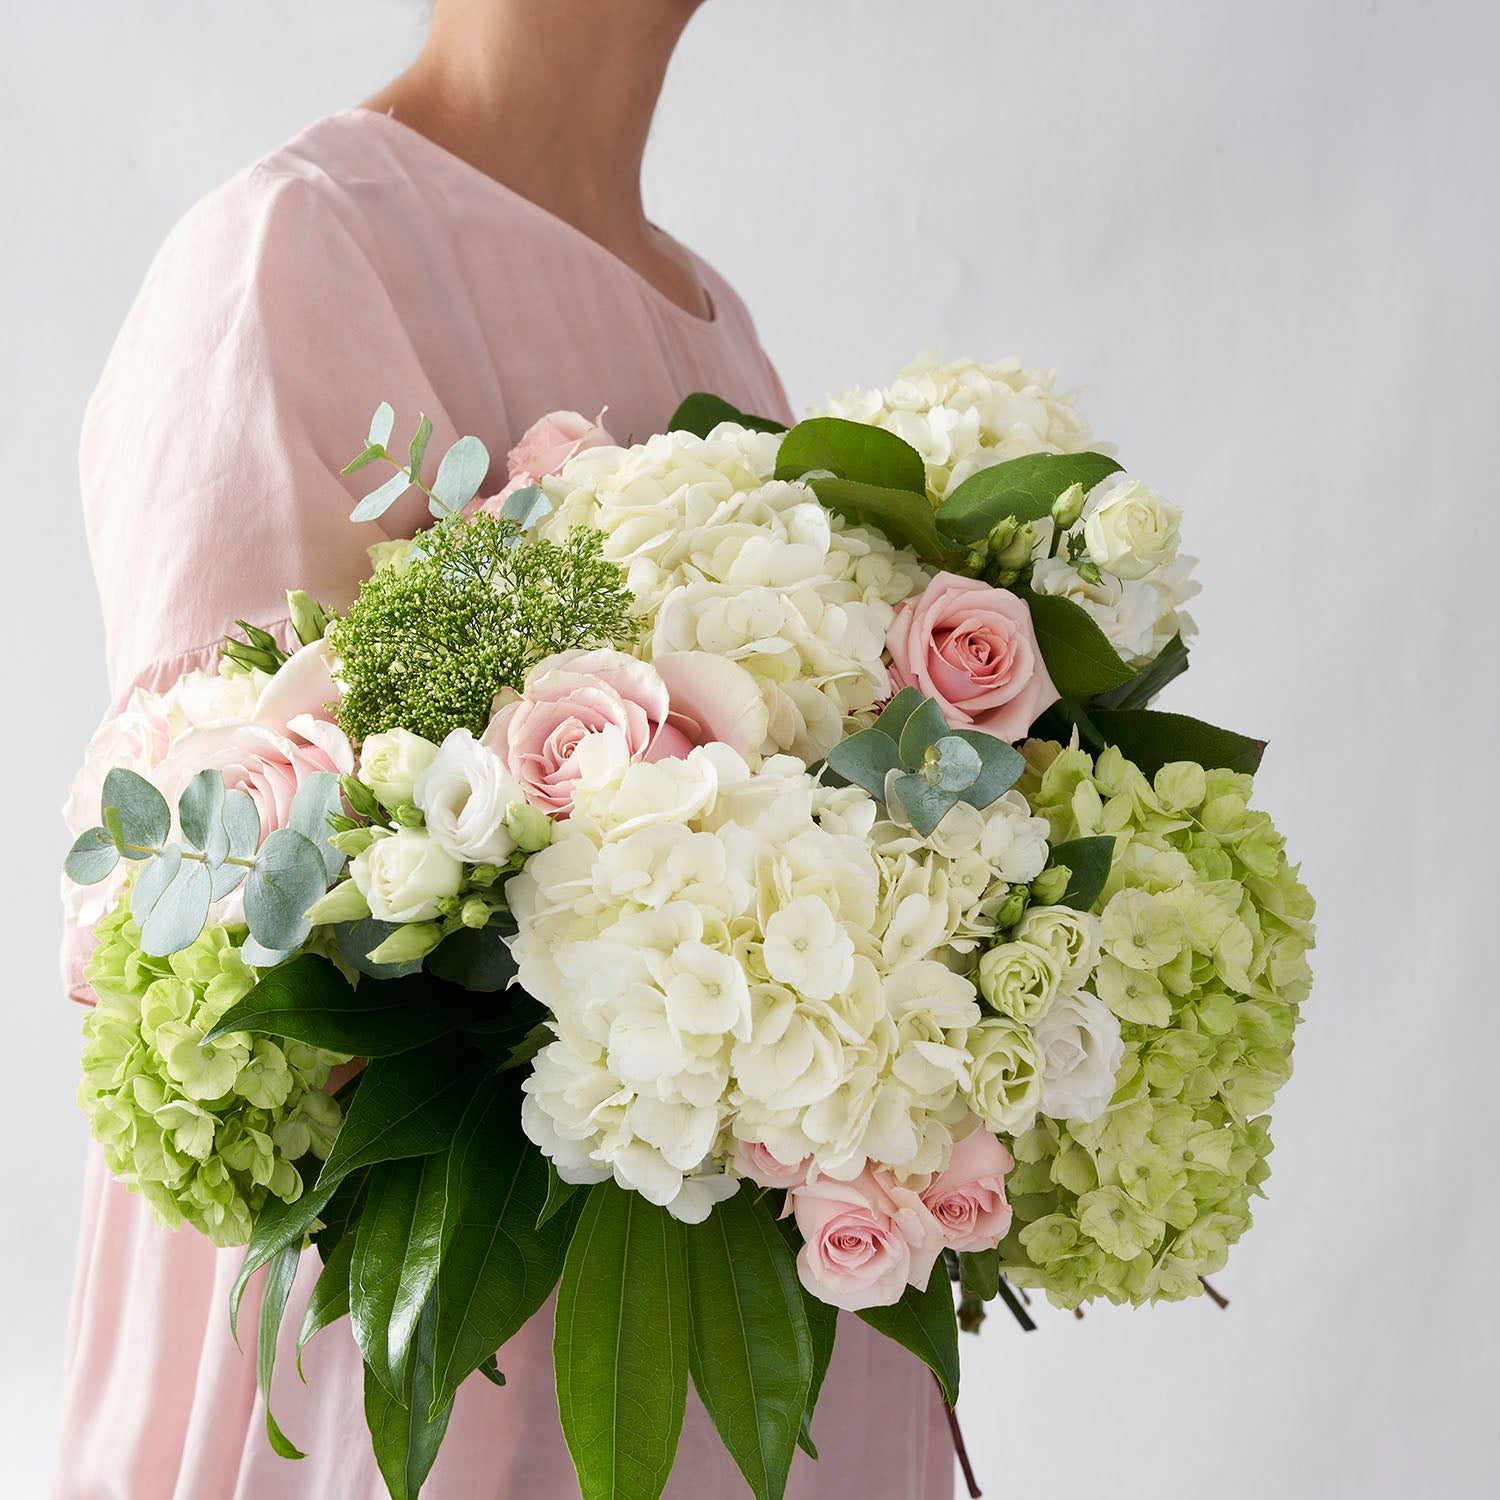 Woman in pink dress, holding bouquet of white and green  hydrangea, soft pink roses and eucalyptus.